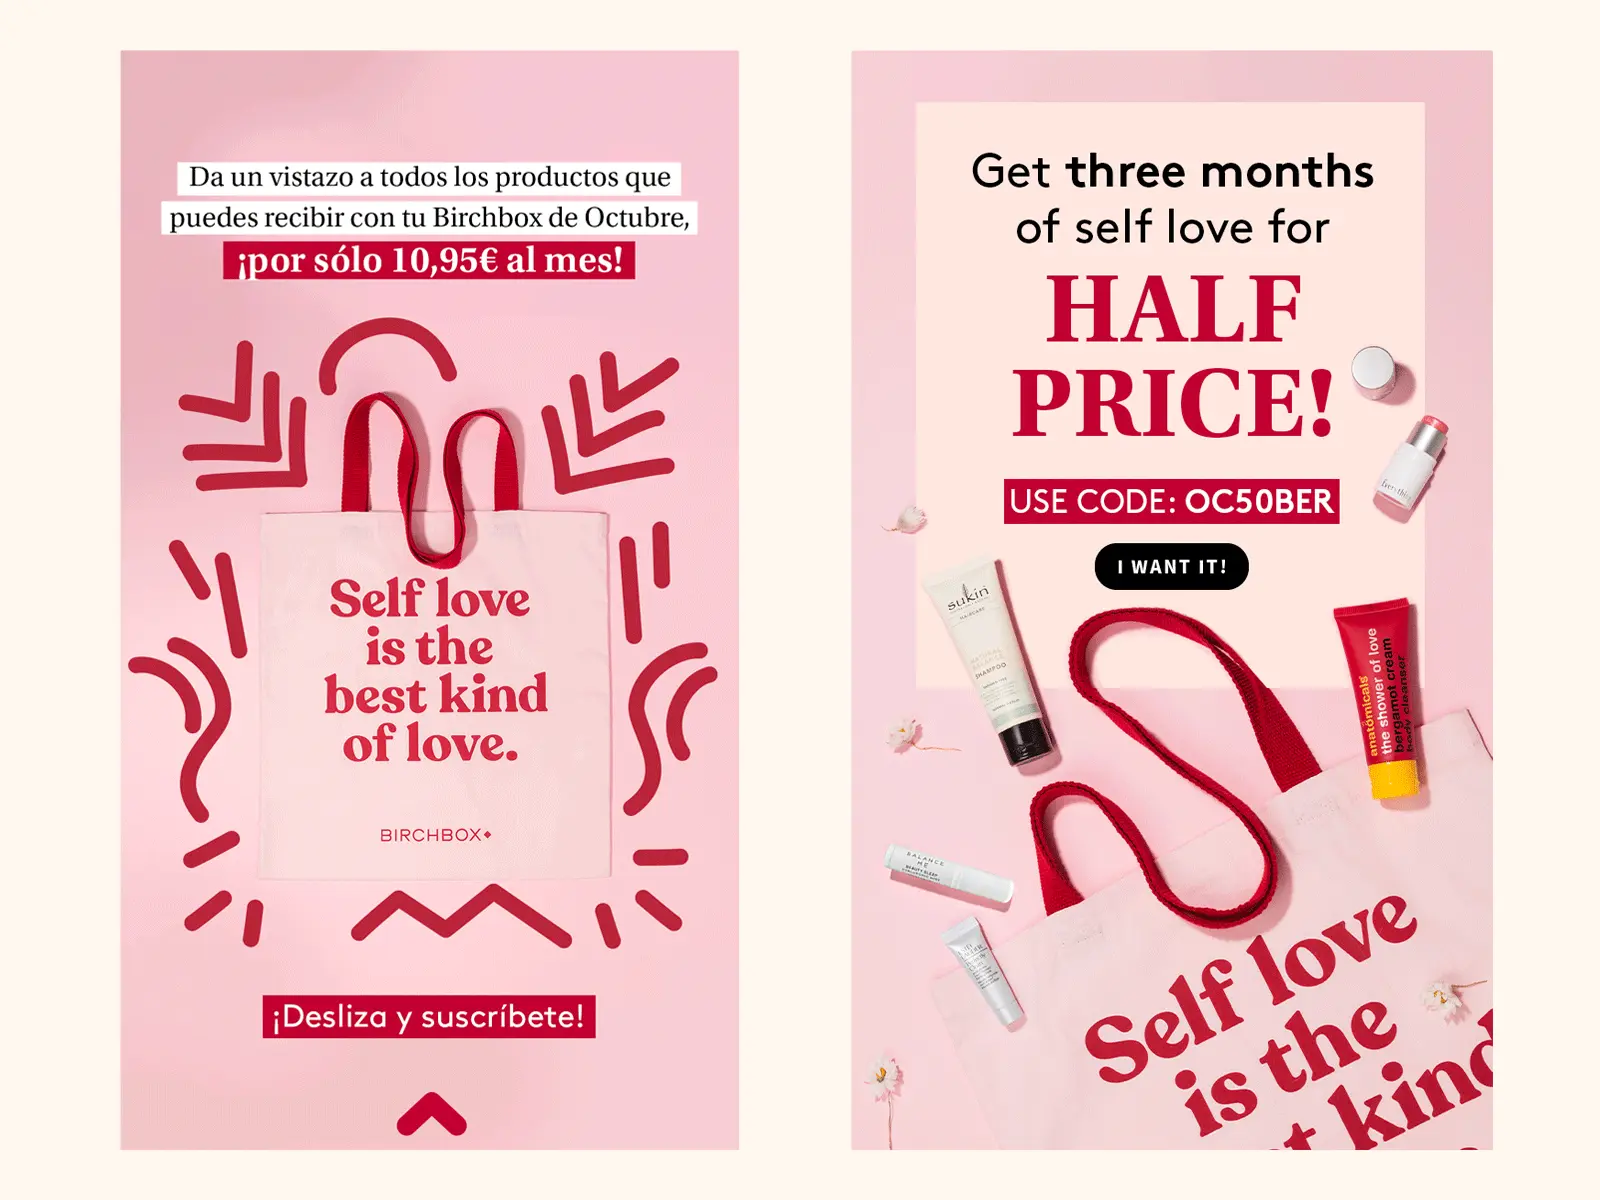 Paid Media design on left and Newsletter design on right, both promoting selected cosmetic products